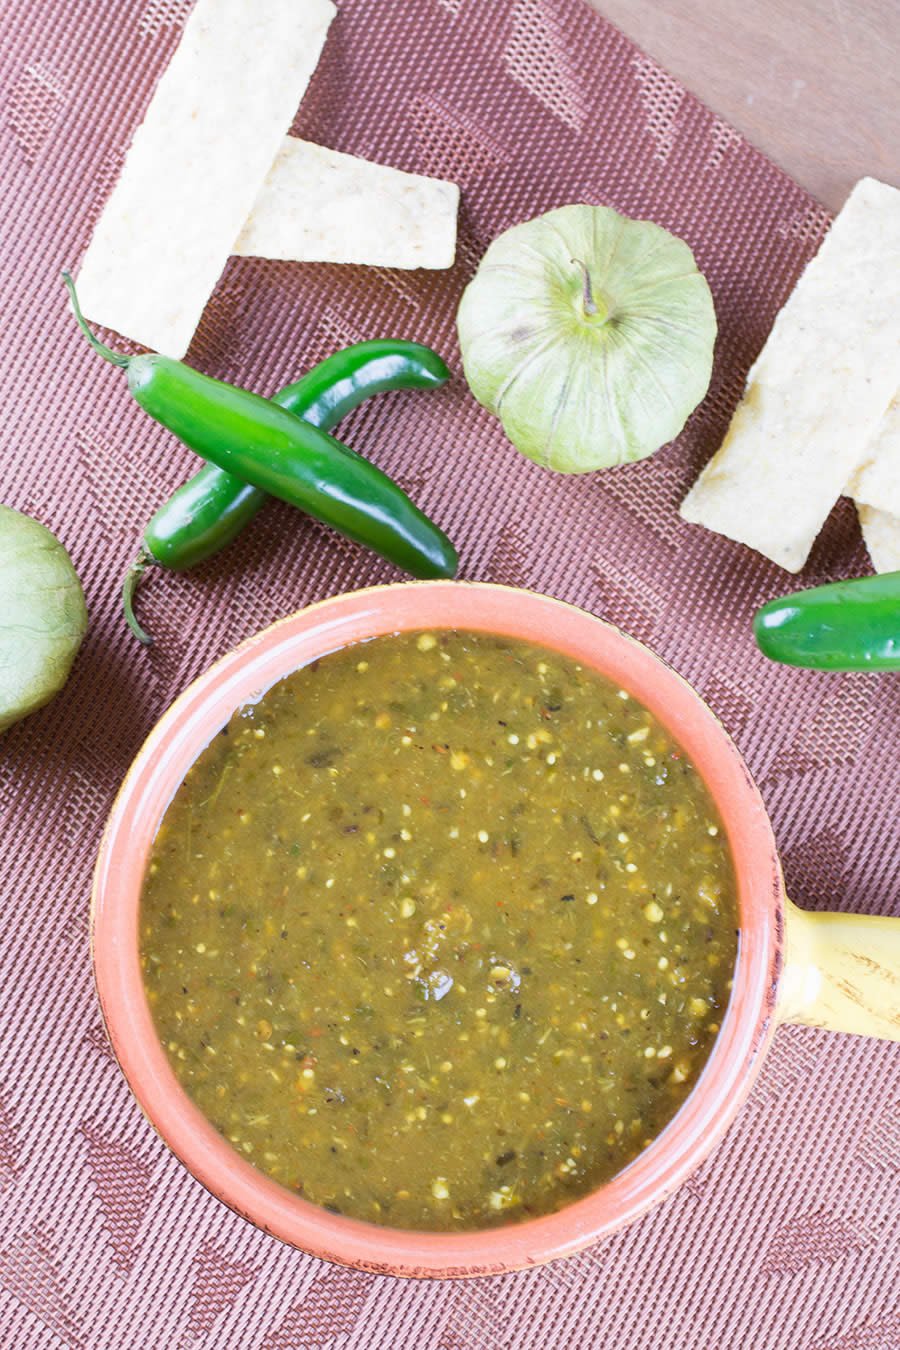 Homemade Green Enchilada Sauce with Roasted Tomatillos Recipe - Chili ...